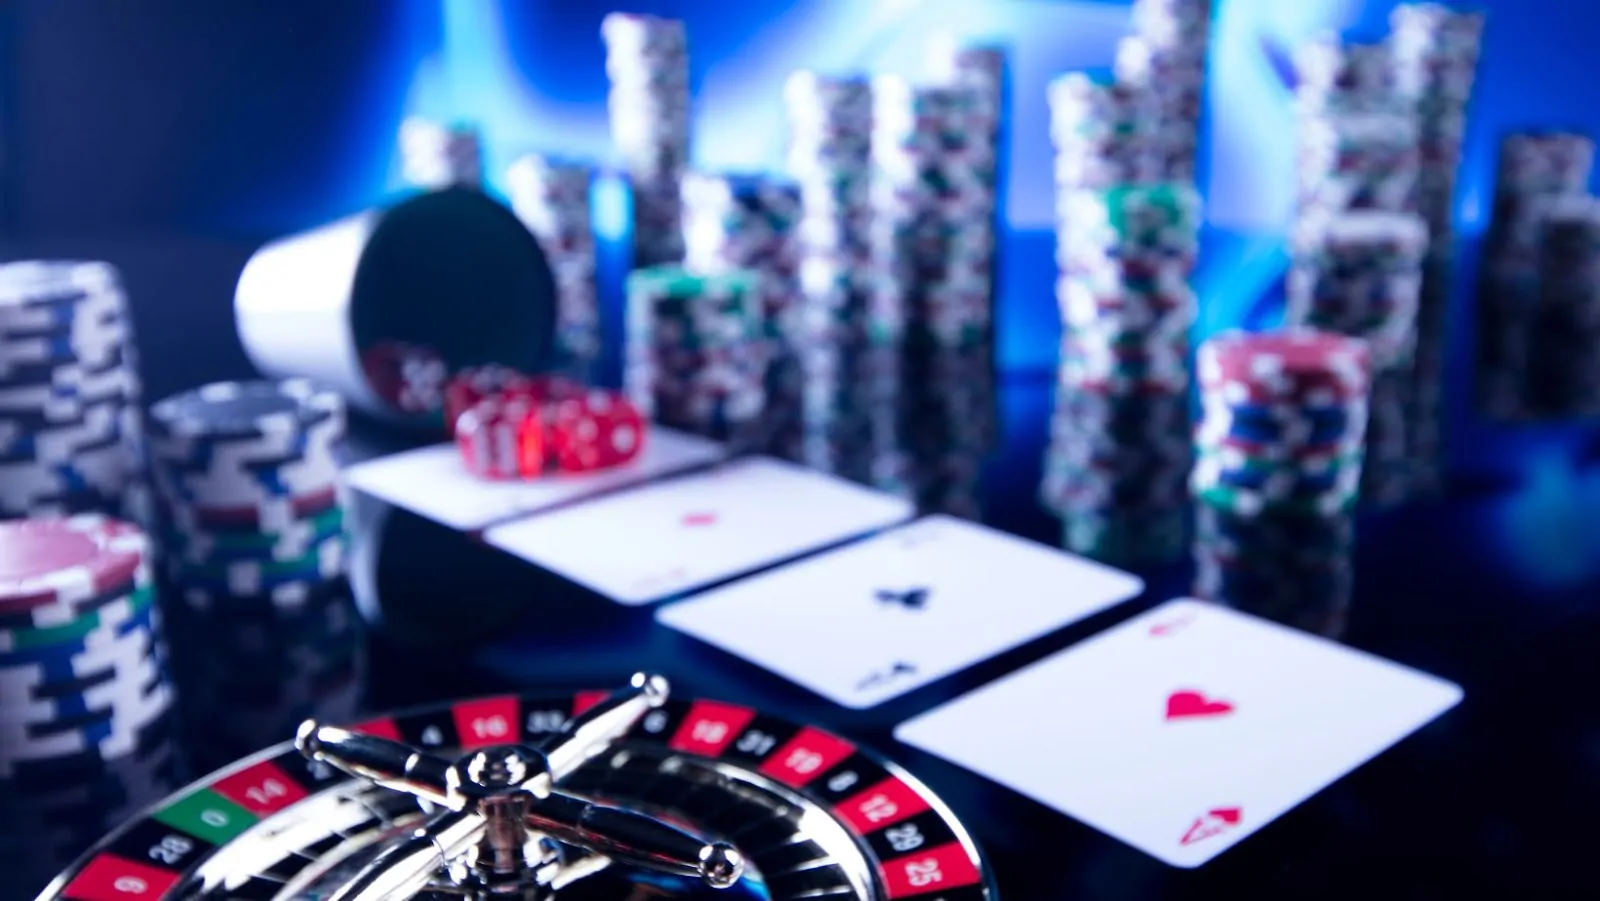 Registration at CasinoMetric – The Chance to choose the best online casino